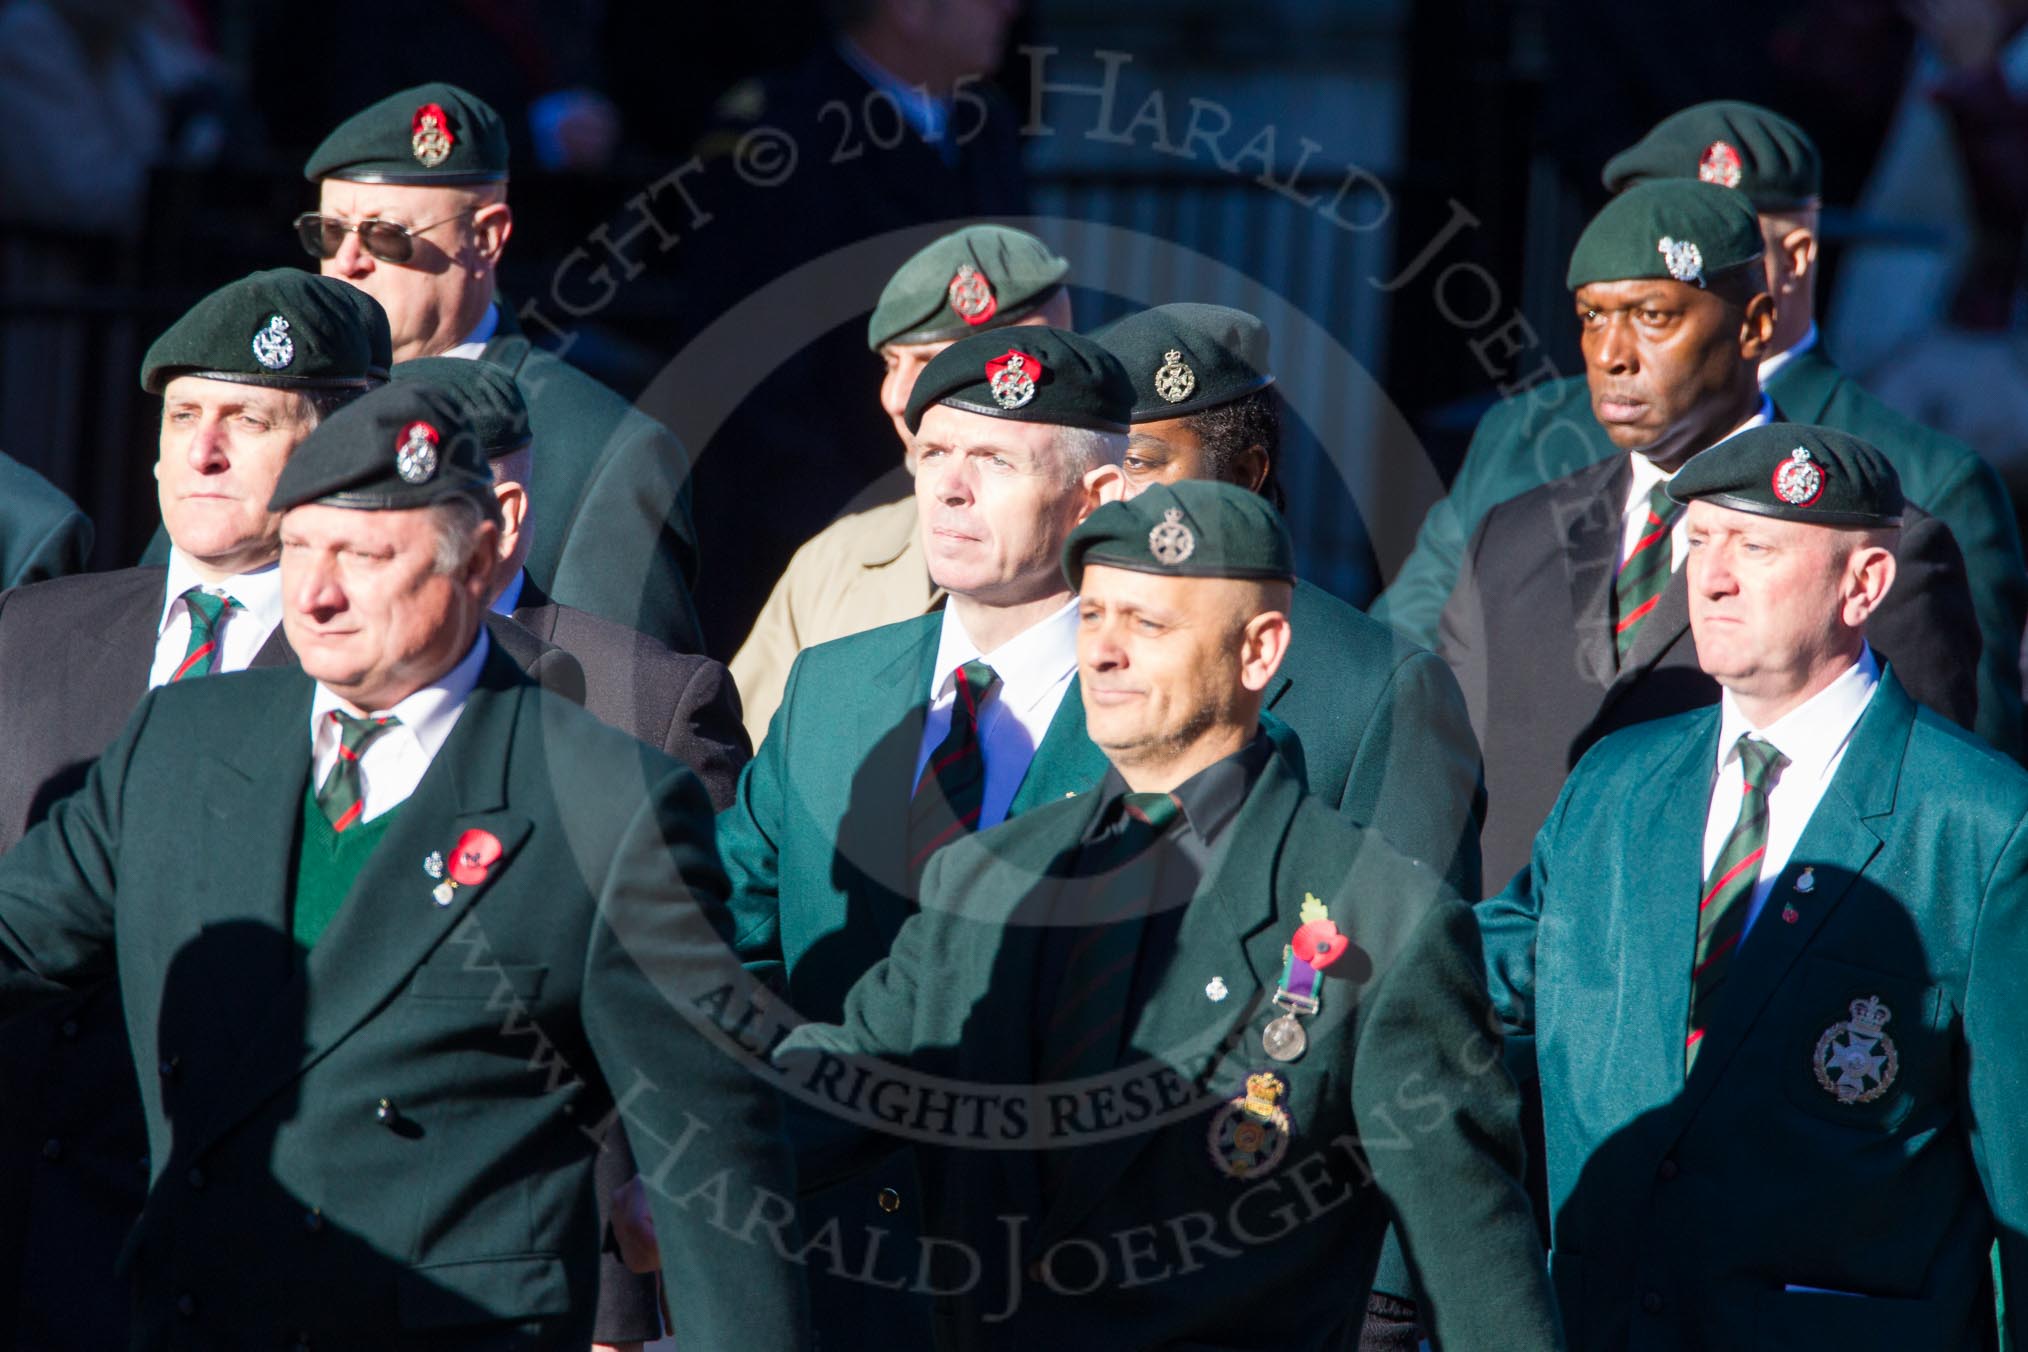 Remembrance Sunday Cenotaph March Past 2013: A16 - Royal Green Jackets Association..
Press stand opposite the Foreign Office building, Whitehall, London SW1,
London,
Greater London,
United Kingdom,
on 10 November 2013 at 11:56, image #1134